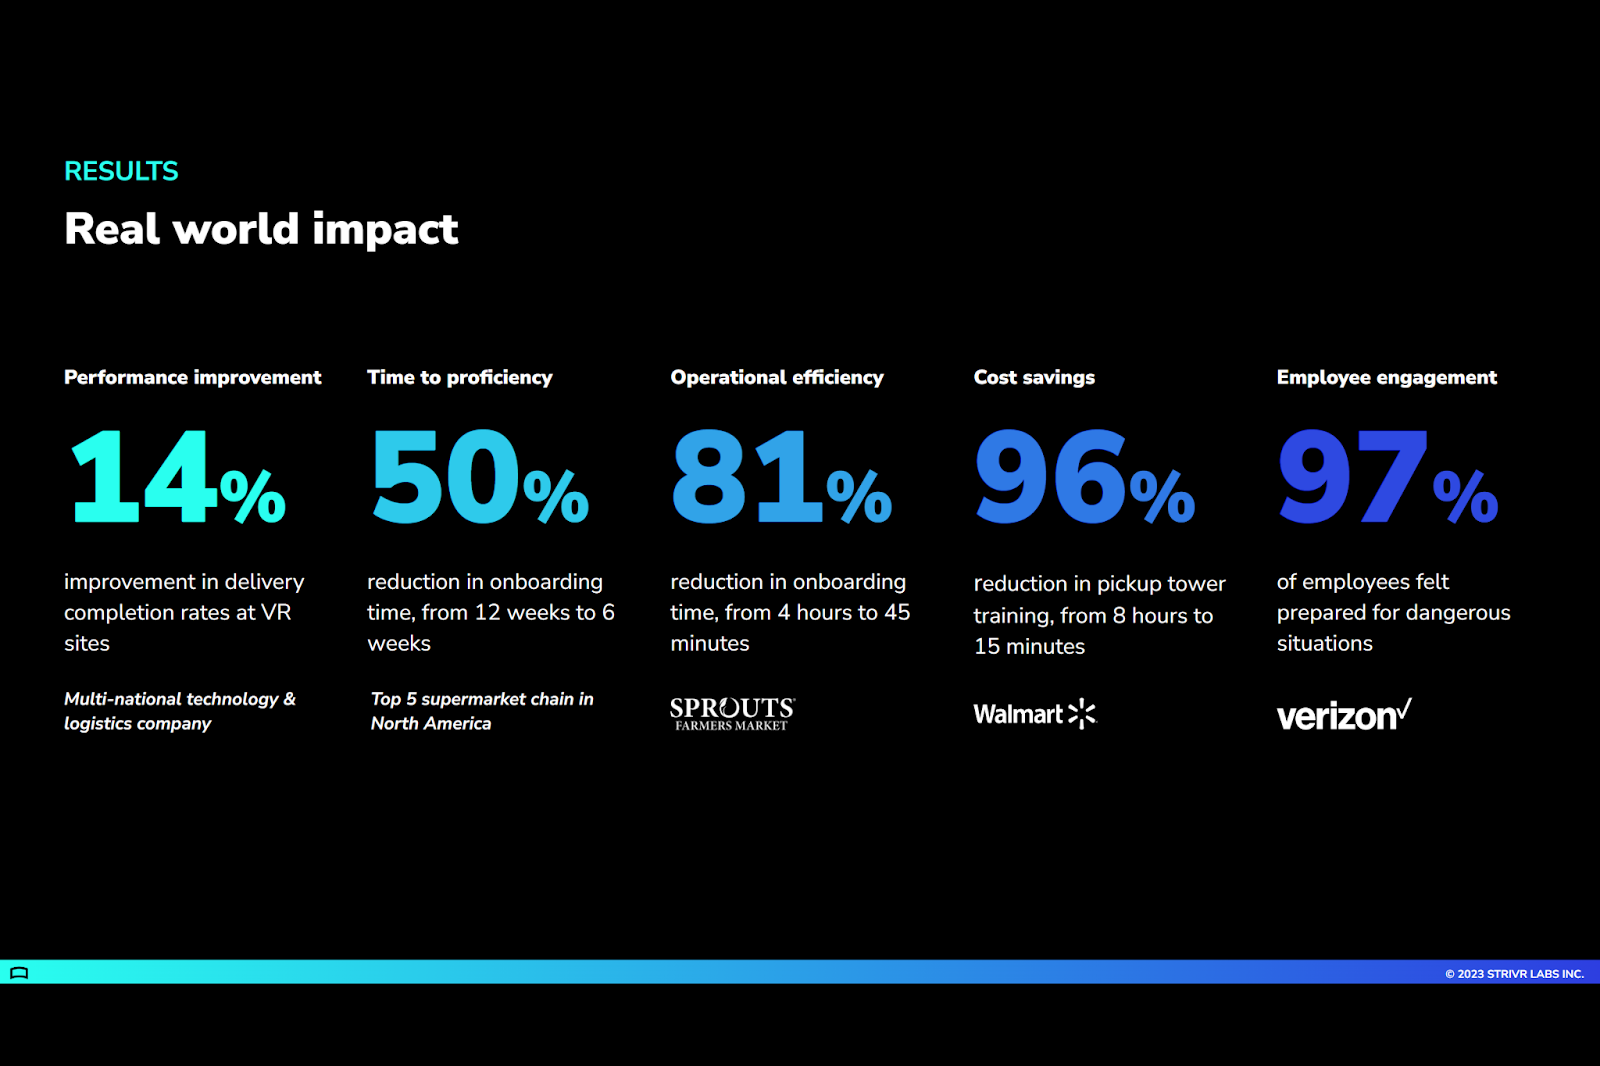 
The image shows an infographic titled "RESULTS: Real world impact" with a dark background and five sections, each highlighting a different statistic:

Performance improvement: A 14% improvement in delivery completion rates at VR sites is shown in a large blue font, attributed to a "Multi-national technology & logistics company."

Time to proficiency: A 50% reduction in onboarding time, from 12 weeks to 6 weeks, is displayed in a large blue font, attributed to a "Top 5 supermarket chain in North America."

Operational efficiency: An 81% reduction in onboarding time, from 4 hours to 45 minutes, is indicated in a large blue font, with "SPROUTS FARMERS MARKET" logo beneath it.

Cost savings: A 96% reduction in pickup tower training, from 8 hours to 15 minutes, is presented in a large blue font, with a "Walmart" logo beneath it.

Employee engagement: 97% of employees felt prepared for dangerous situations, shown in a large blue font, with a "Verizon" logo beneath it.